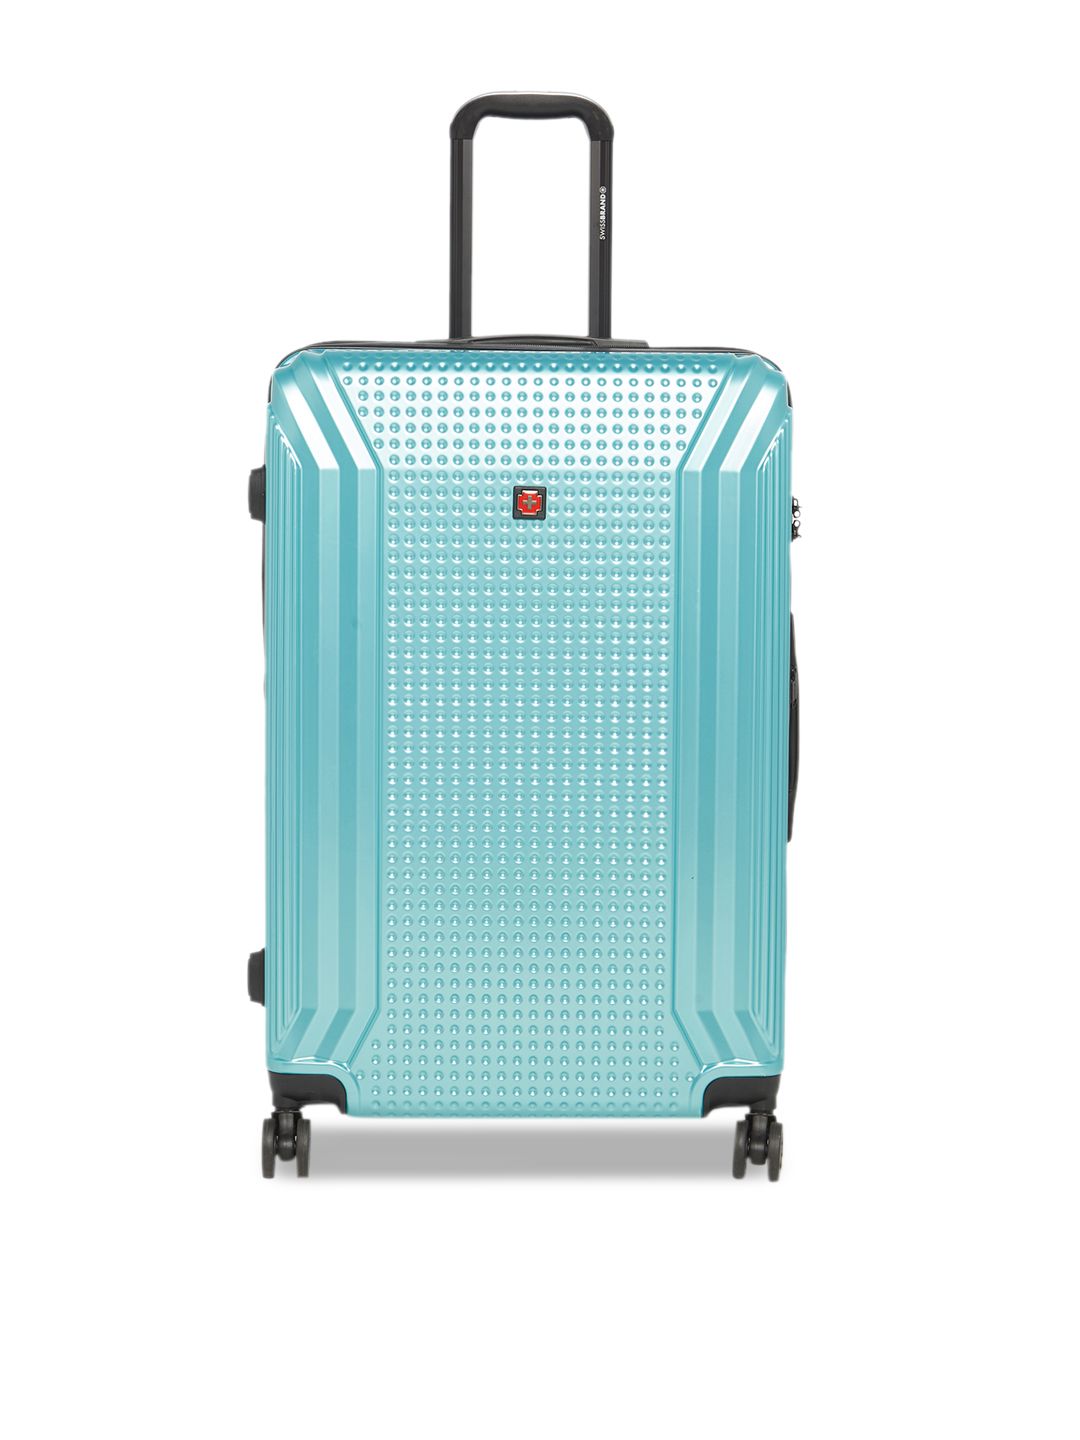 SWISS BRAND Unisex Green Textured VERNIER 360-Degree Rotation Hard-Sided Large Trolley Suitcase Price in India